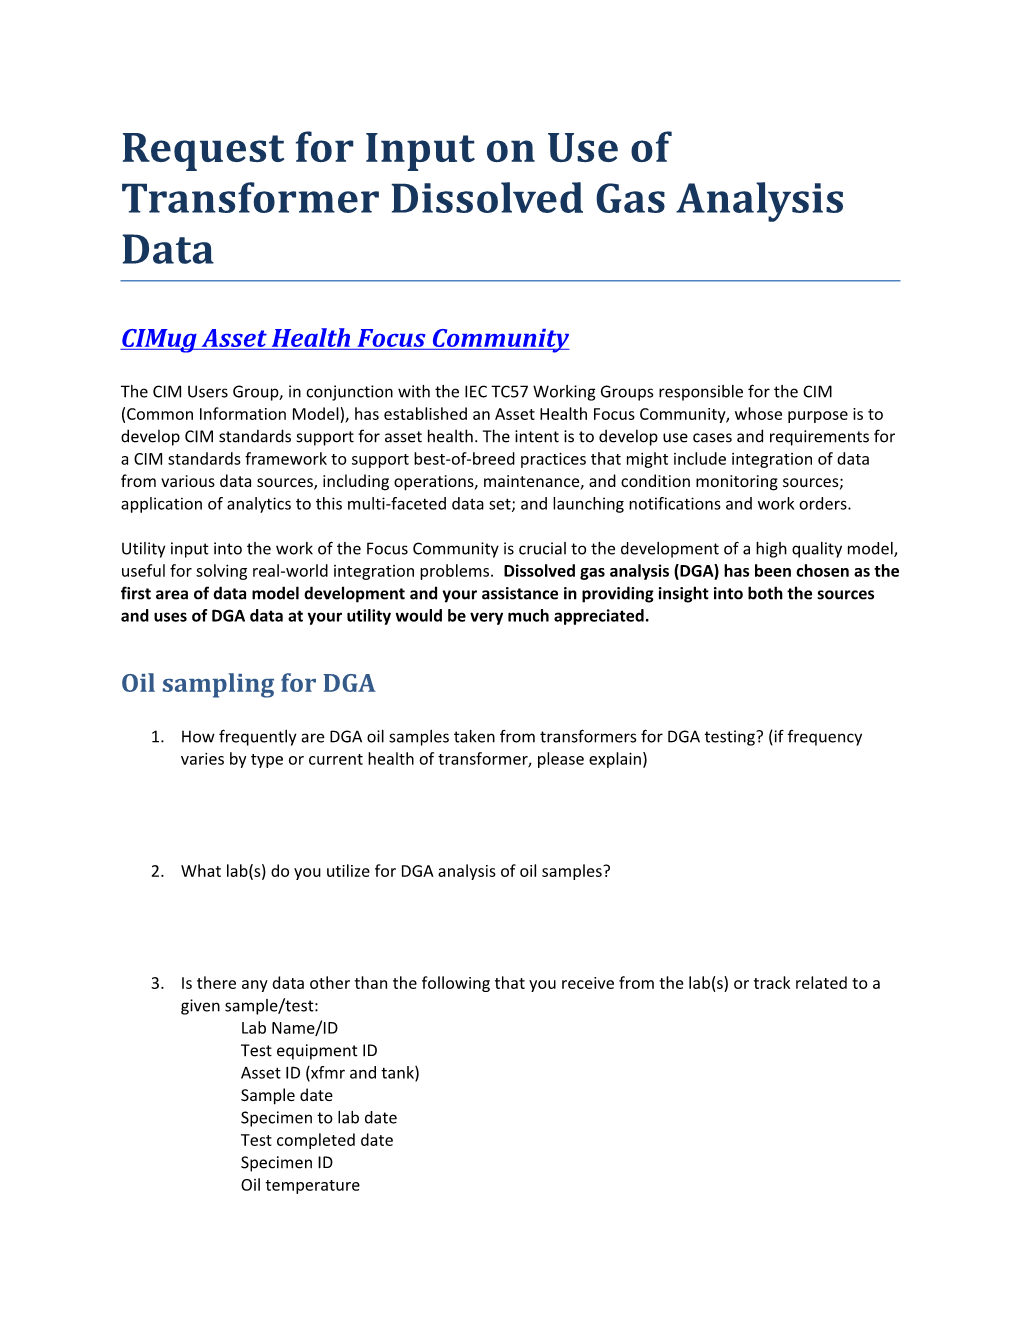 Request for Input on Use of Transformer Dissolved Gas Analysis Data